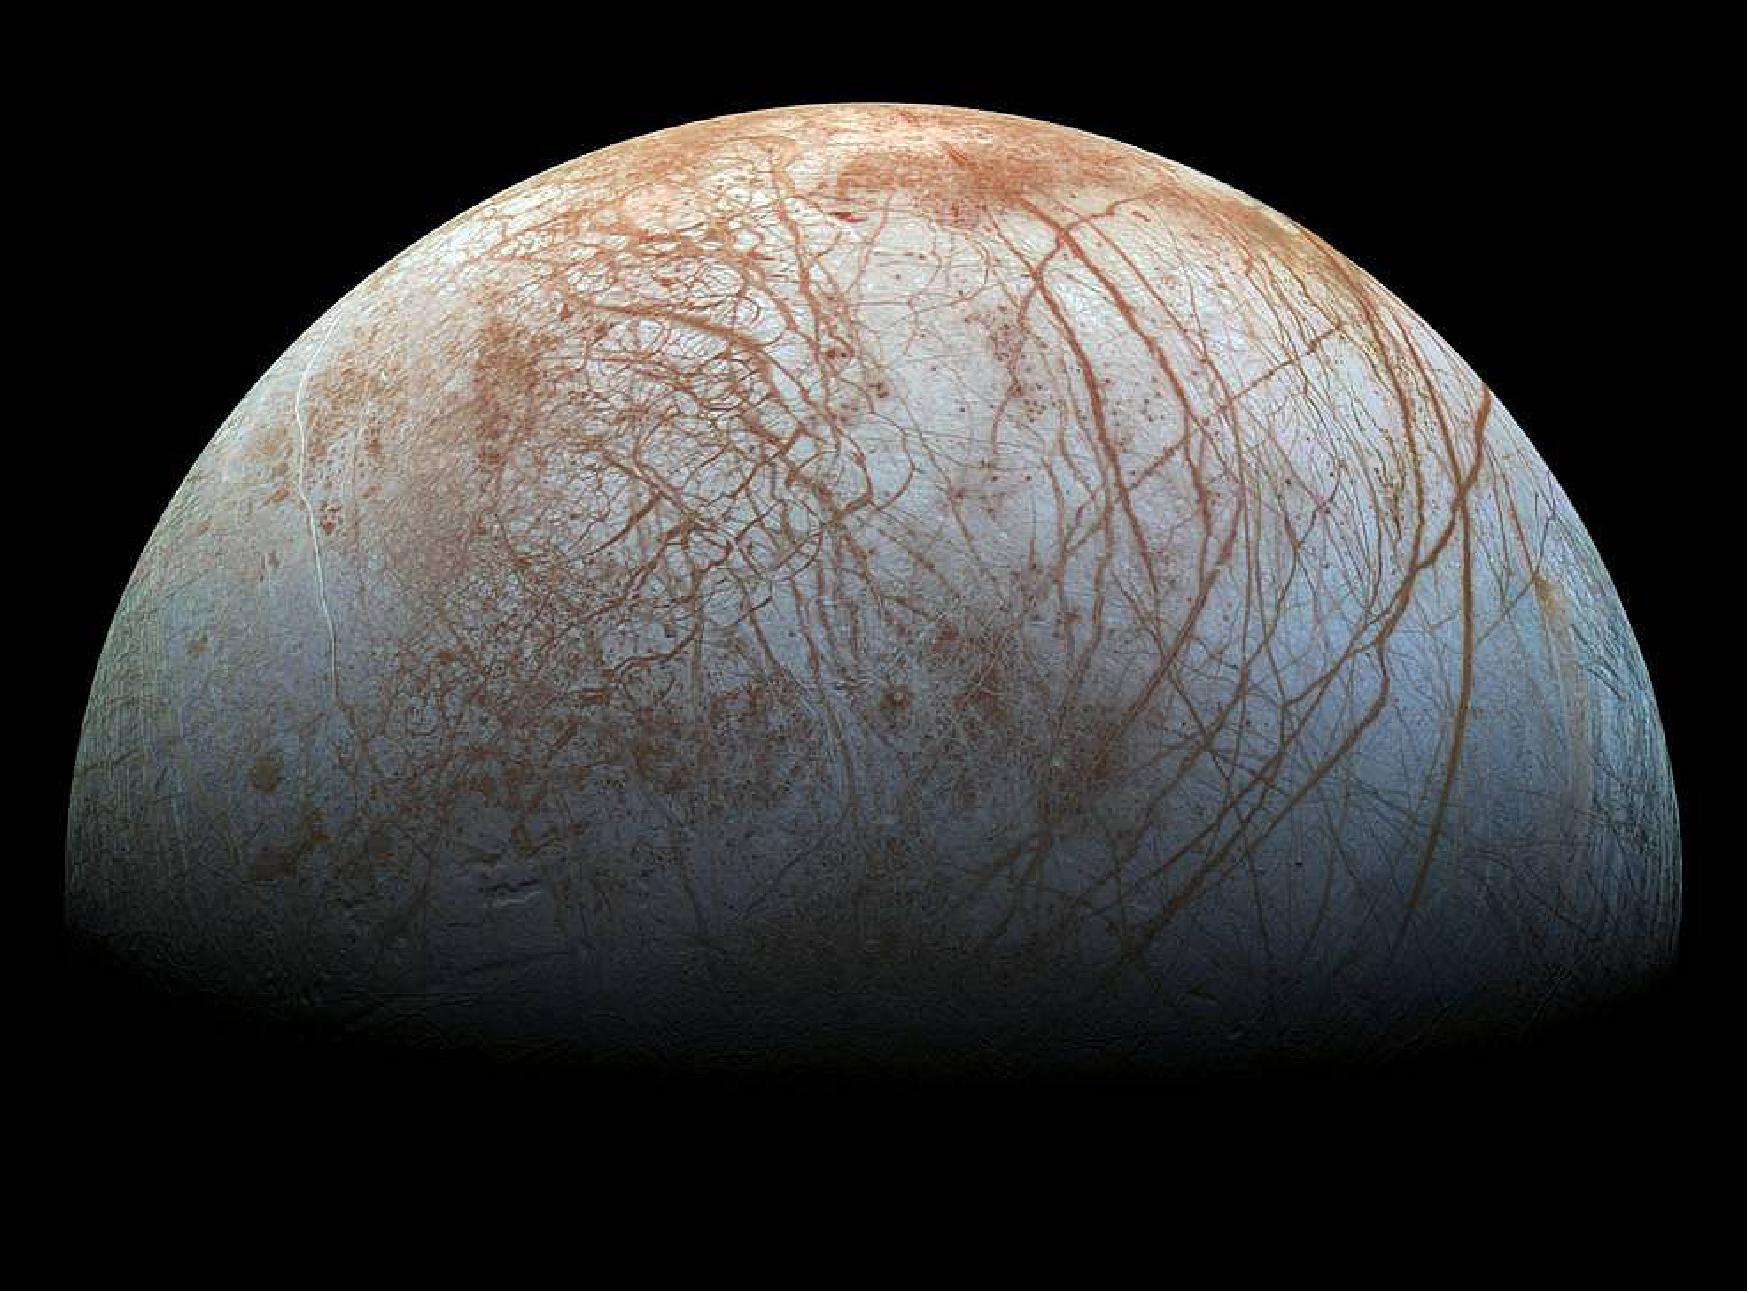 Figure 21: Made from images taken by NASA's Galileo spacecraft in the late 1990s, this processed color view is one of the best images Earthlings have of Jupiter’s moon Europa. This little moon may be the best place in our solar system to look for life beyond Earth (image credit: NASA/JPL-Caltech/SETI Institute)